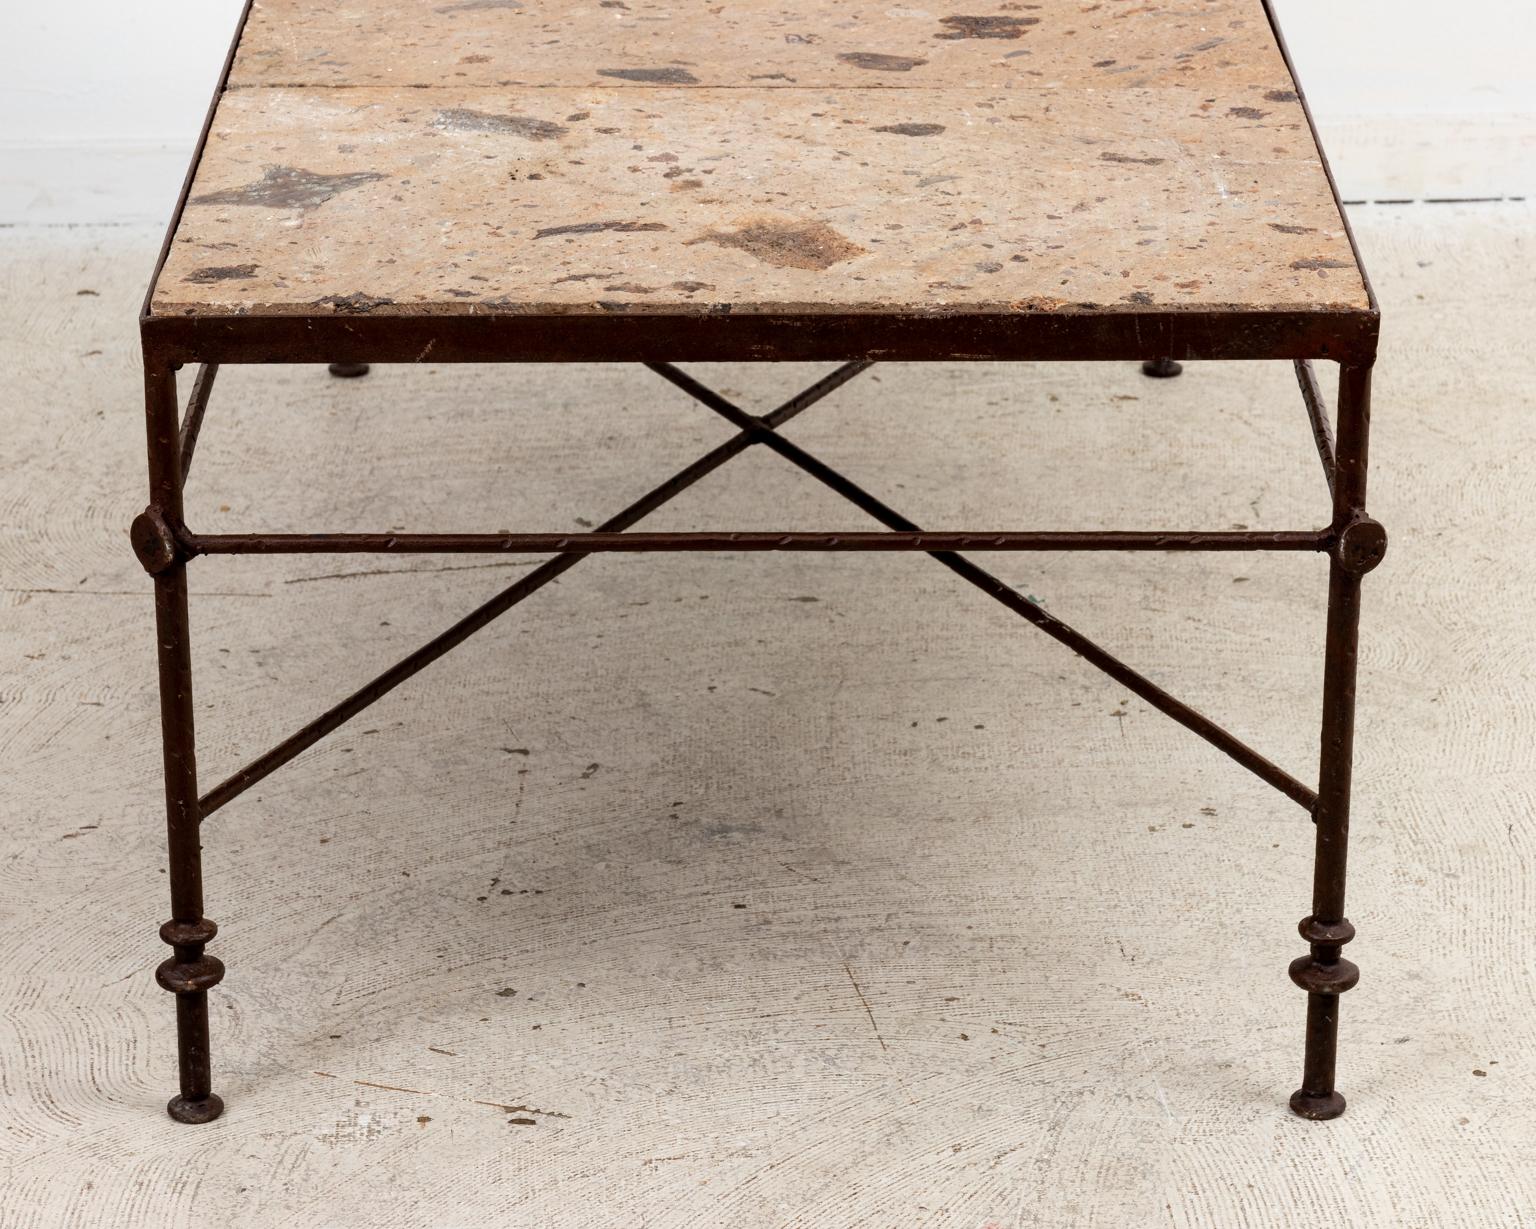 20th Century Travertine and Iron Coffee Table